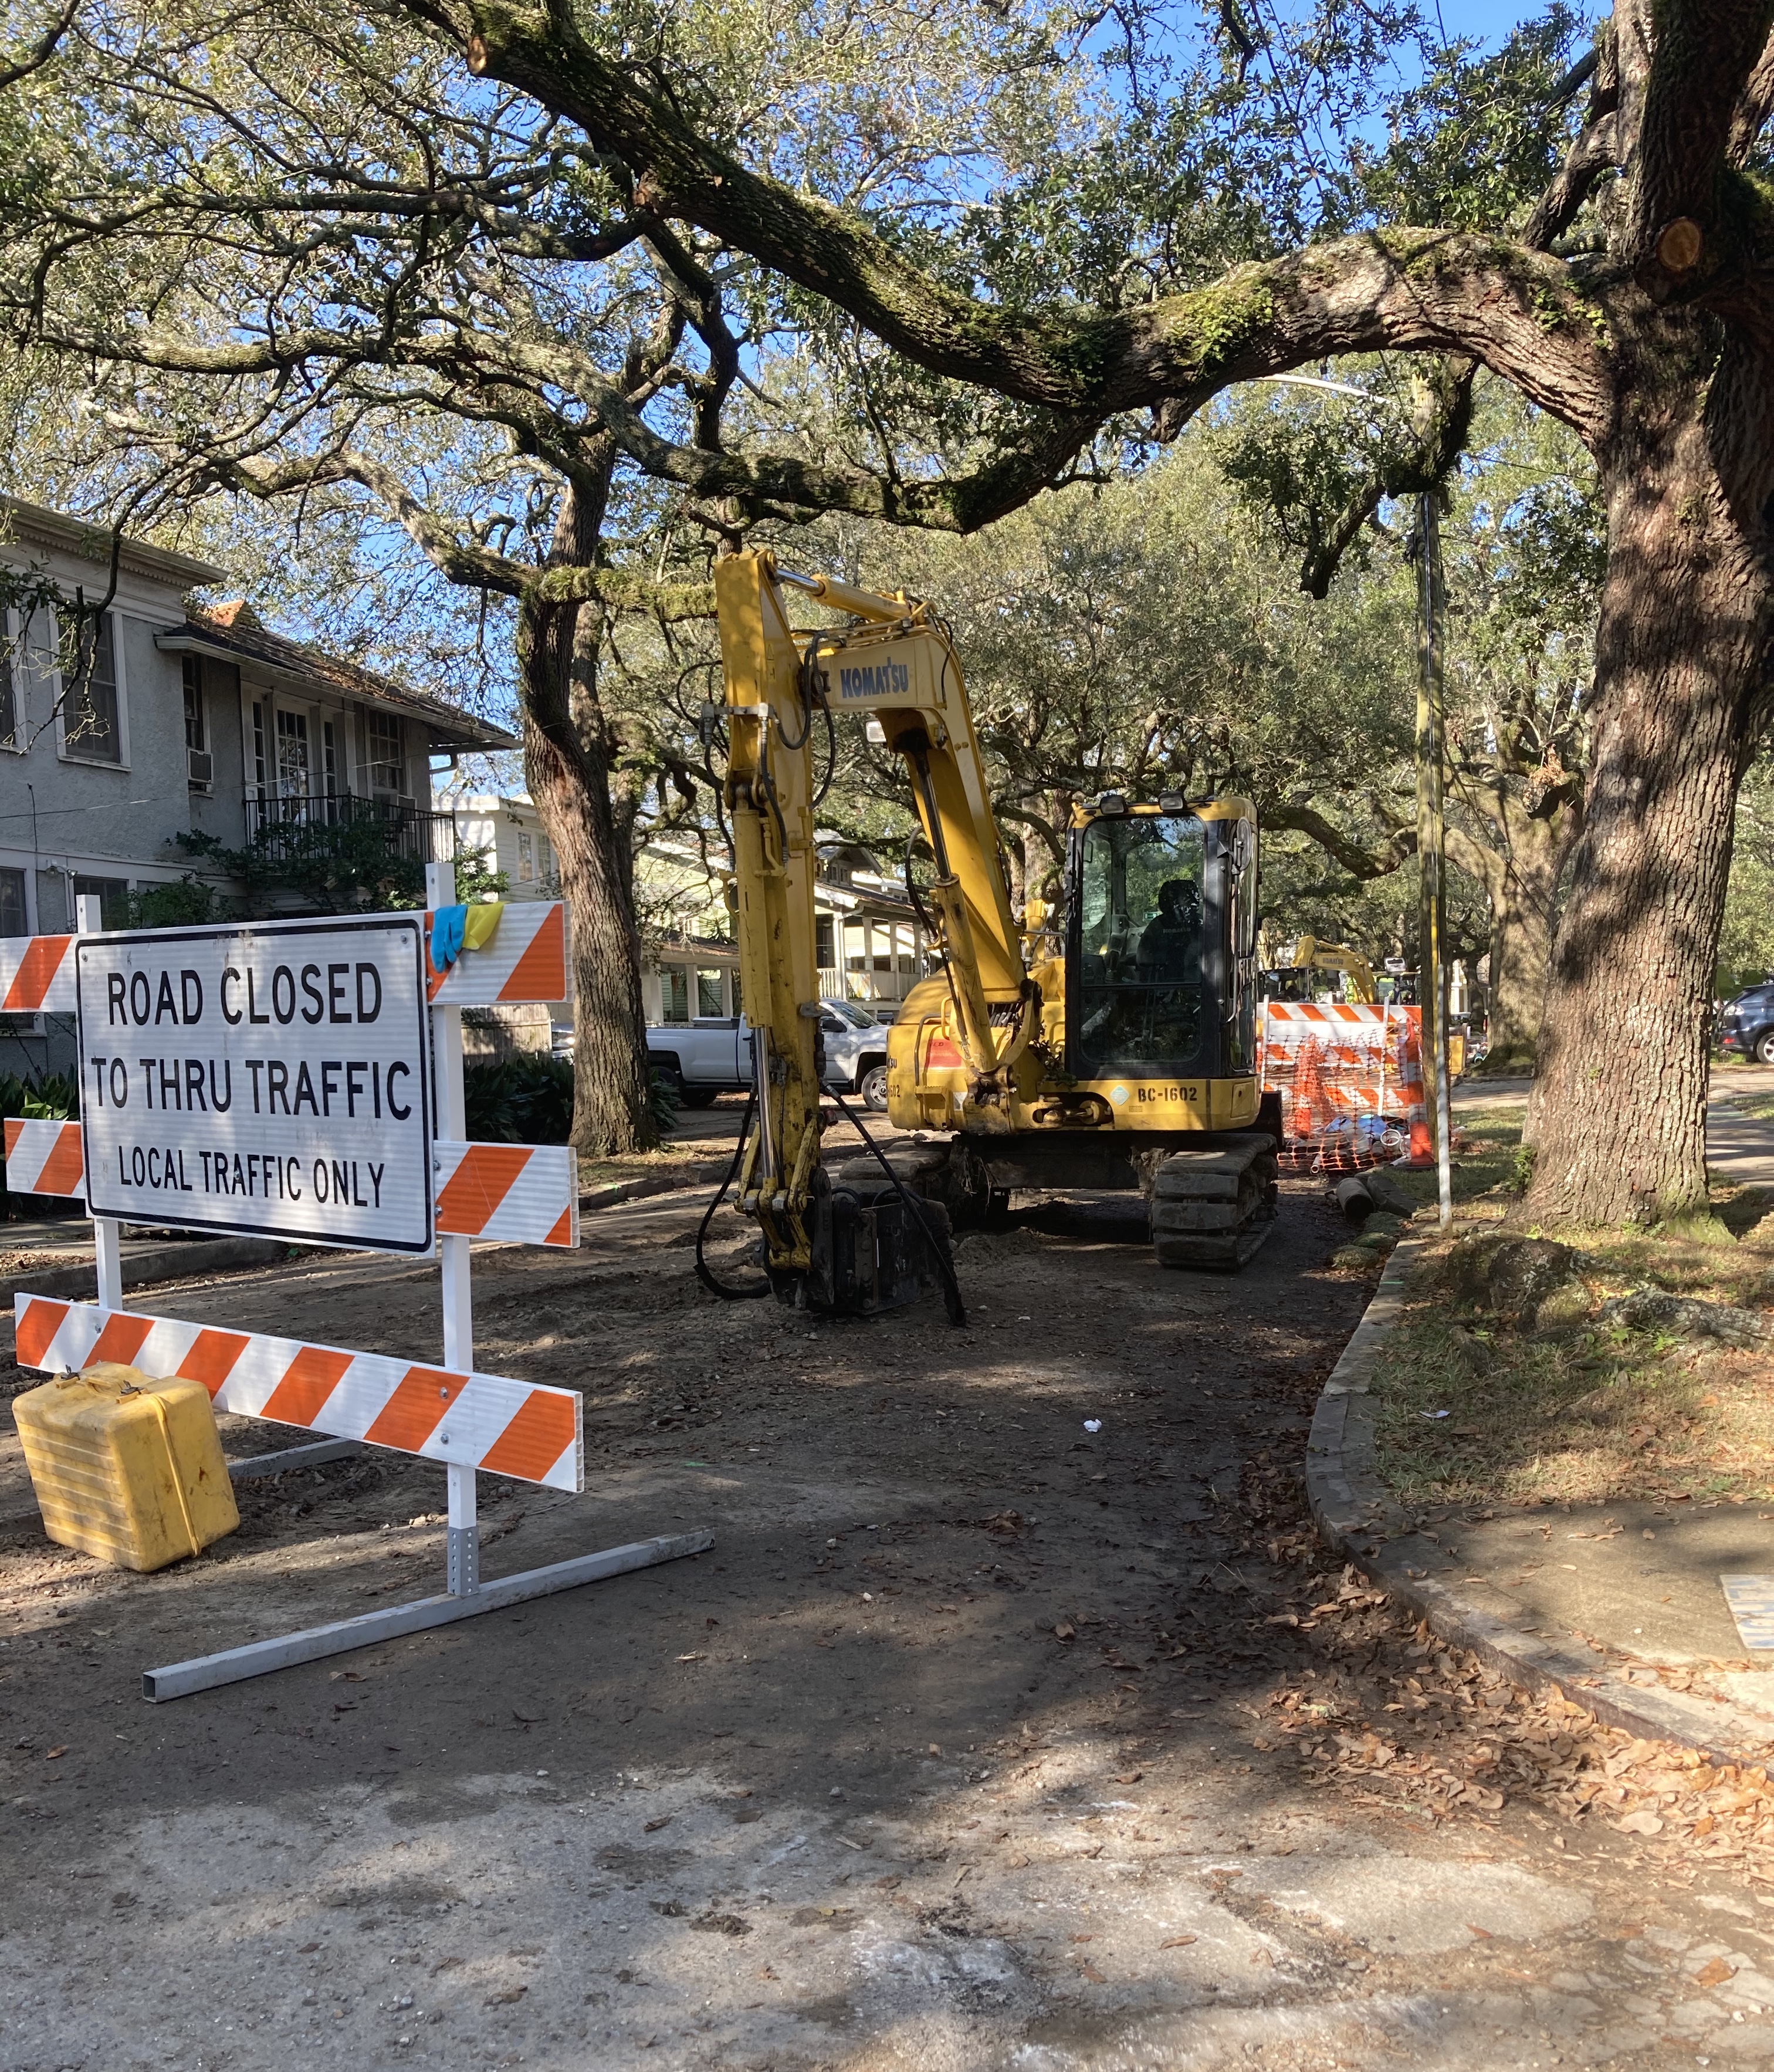 MARLYVILLE-FONTAINEBLEAU GROUP C PROJECT CONTINUES WATER AND SEWER LINE SYSTEM REPLACEMENTS